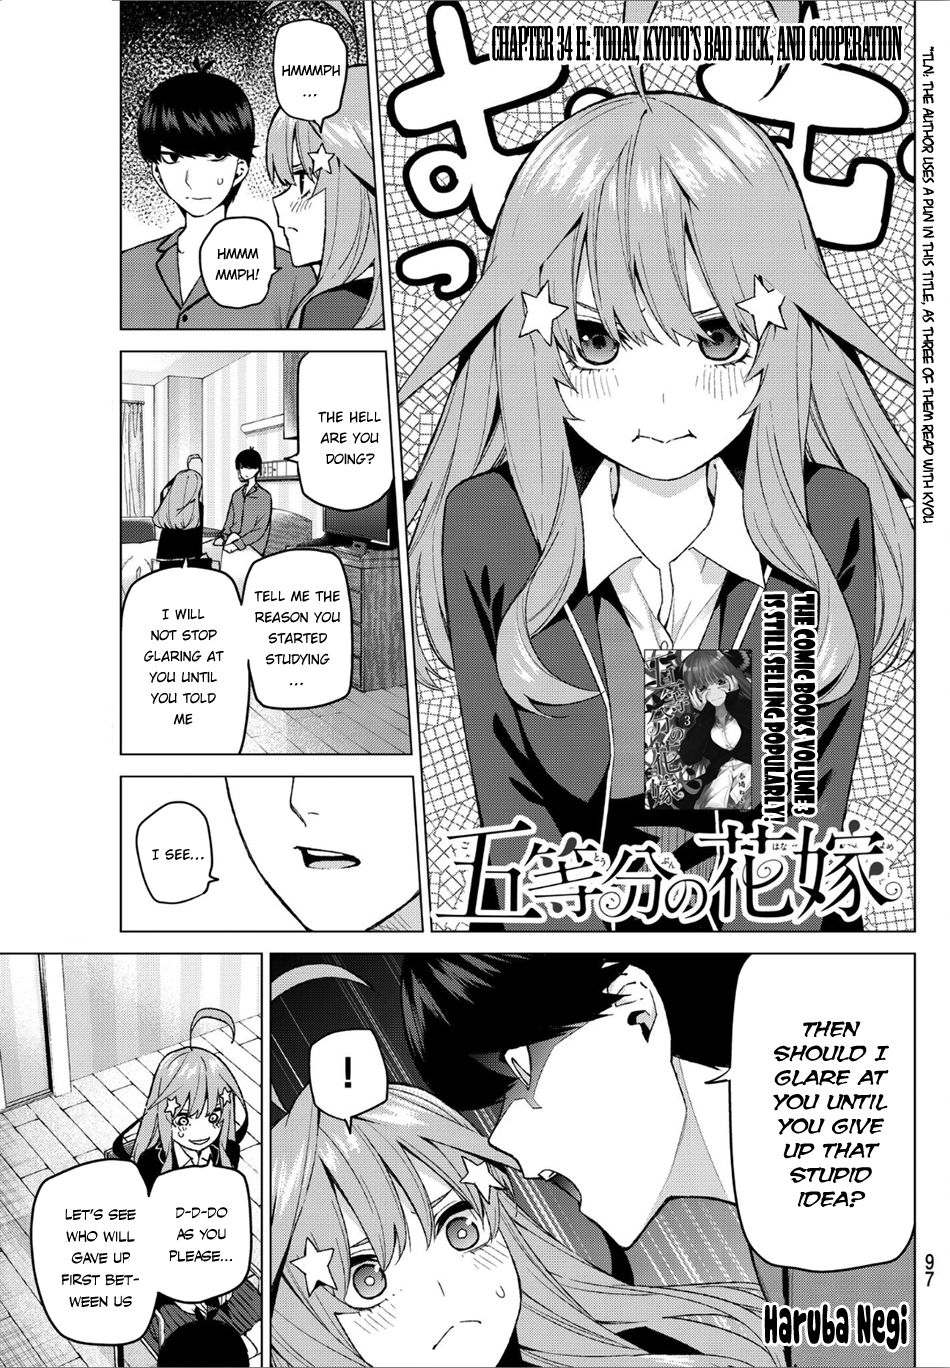 5Toubun no Hanayome Ch. 34 Today, Kyoto's Bad Luck, And Cooperation